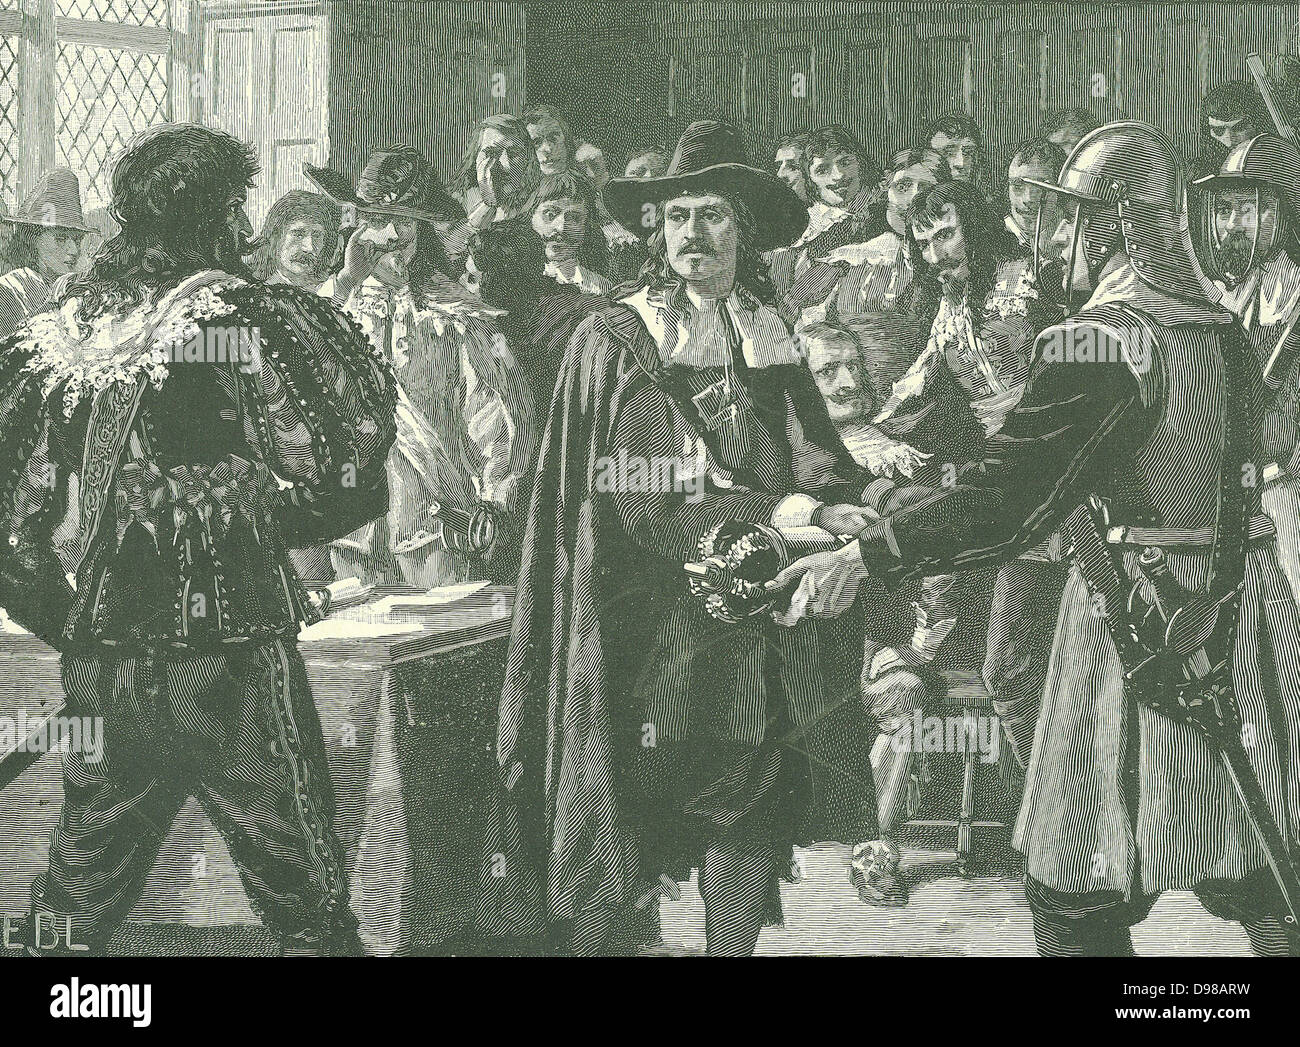 Oliver Cromwell (1599-1658) English statesman. Lord Protector (1653-1658). Cromwell dissolving the Long Parliament in 1653. The Long Parliament began in 1640. Engraving c1885. Stock Photo